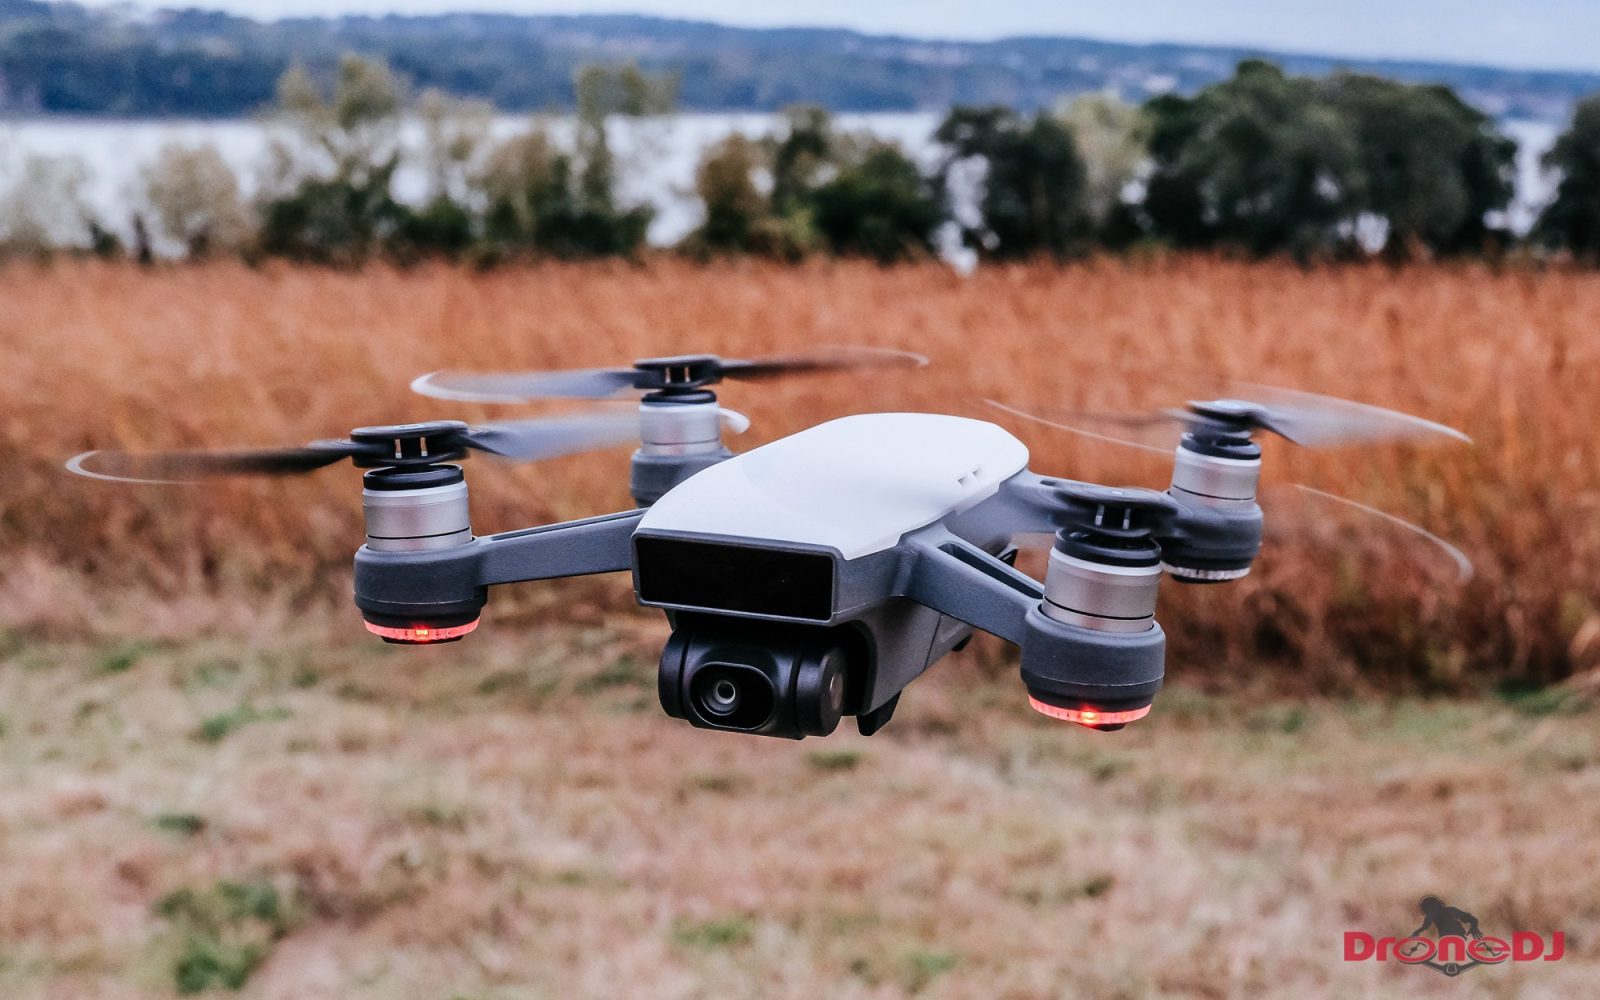 DroneDJ Review: The DJI Spark mini-drone packs a punch